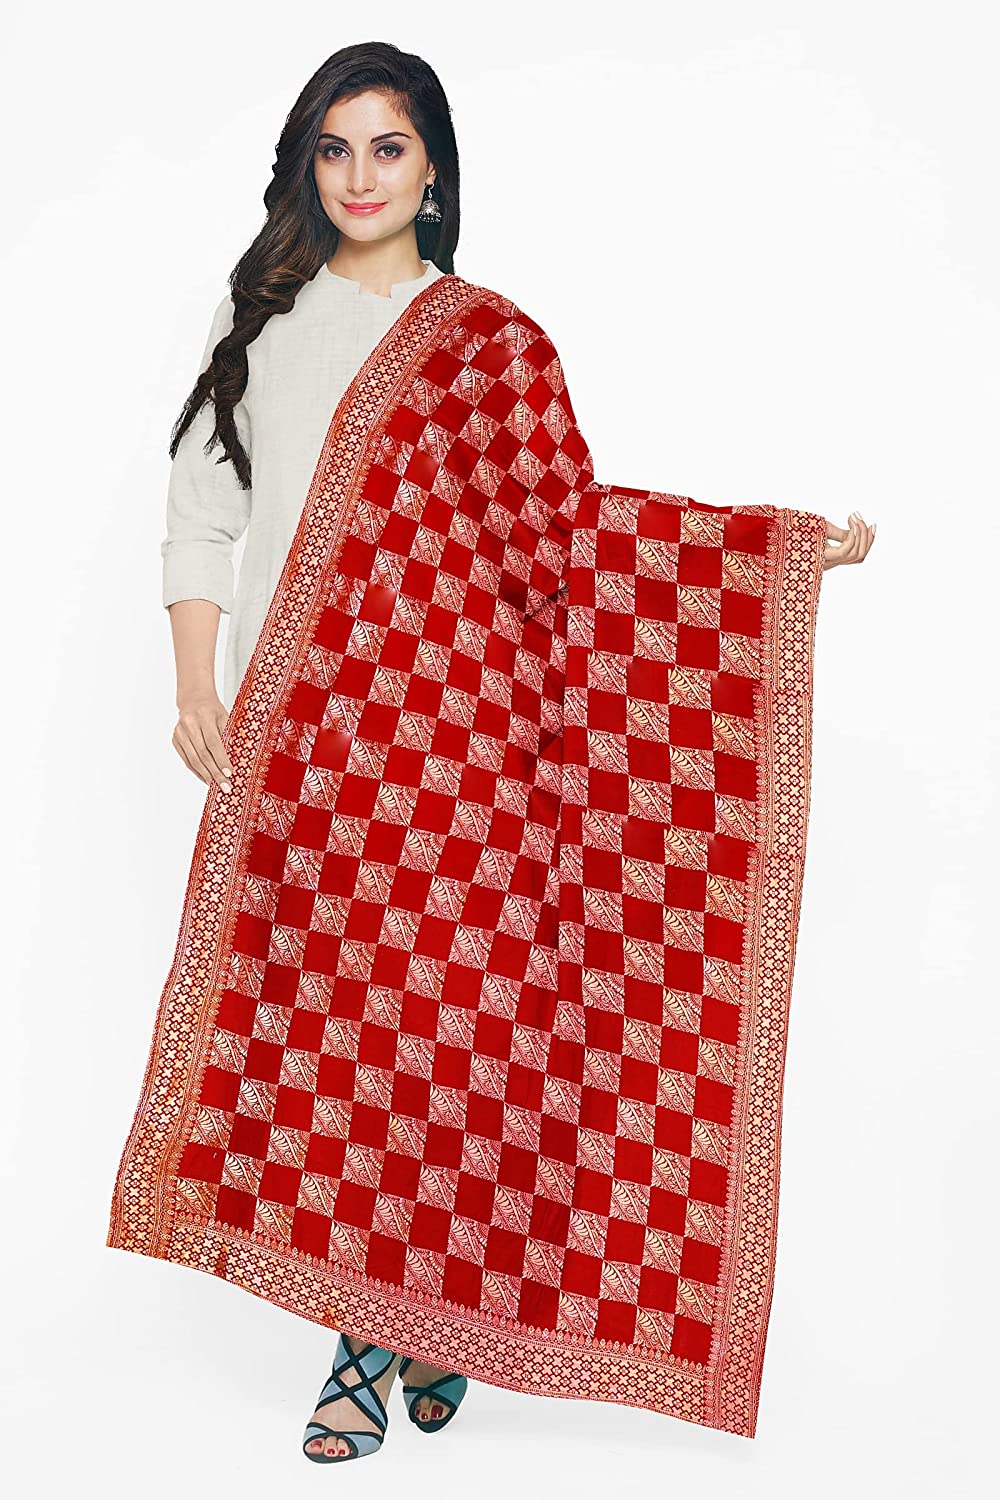 VOGZY.COM Beautiful Silk Dupatta With Plain Weave N Border For Women Free Size, Red Color